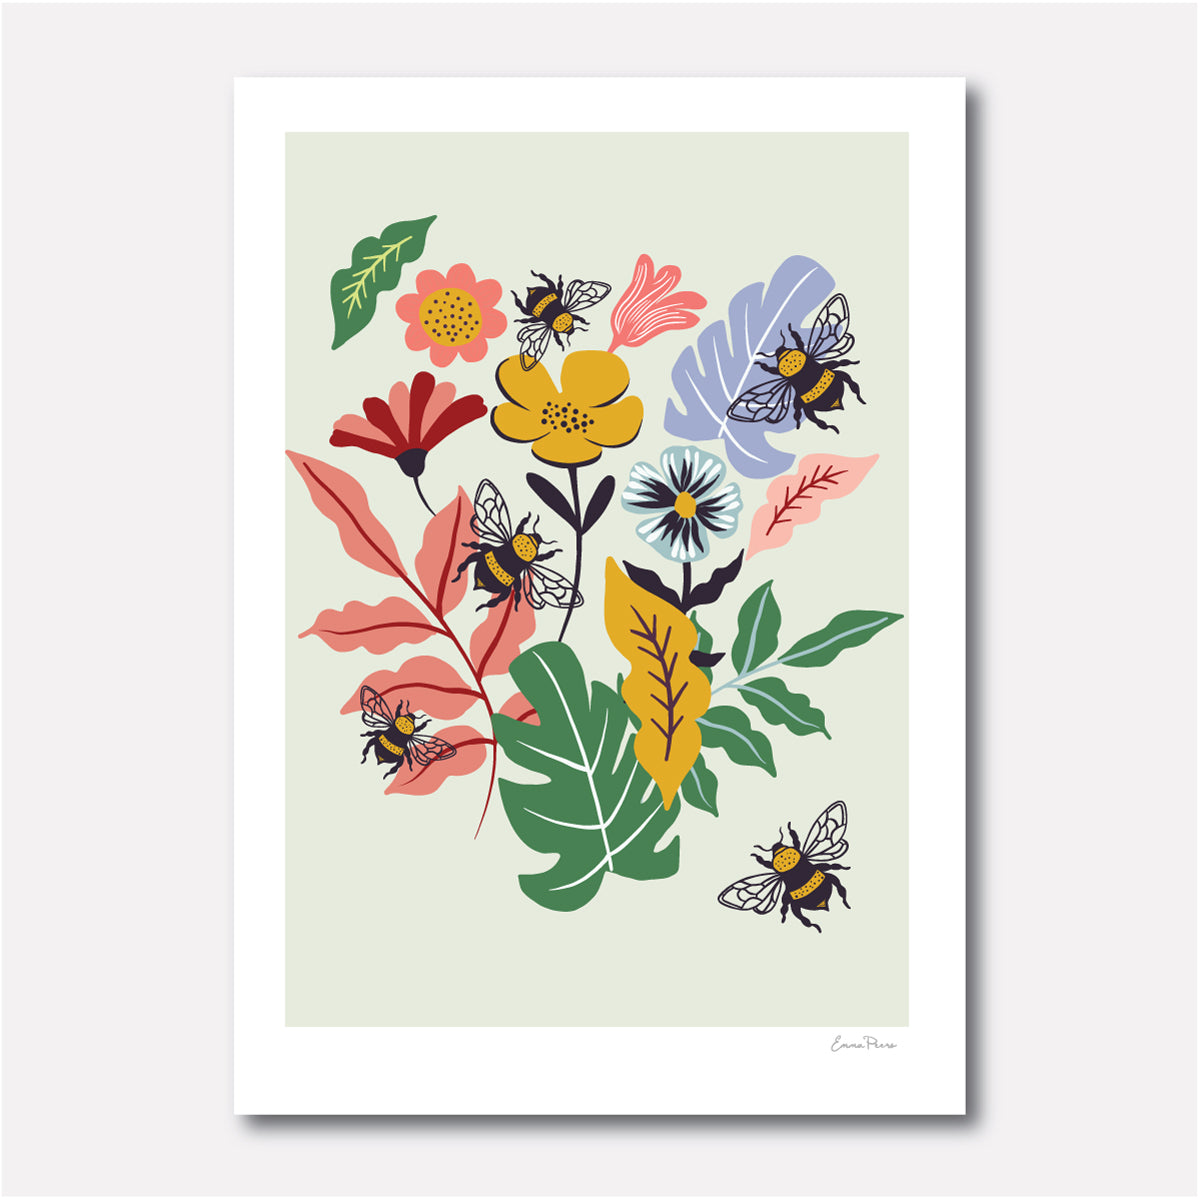 Bumble Bee, plants and flower Illustration print by Emma Peers. Wall art and home decor range.